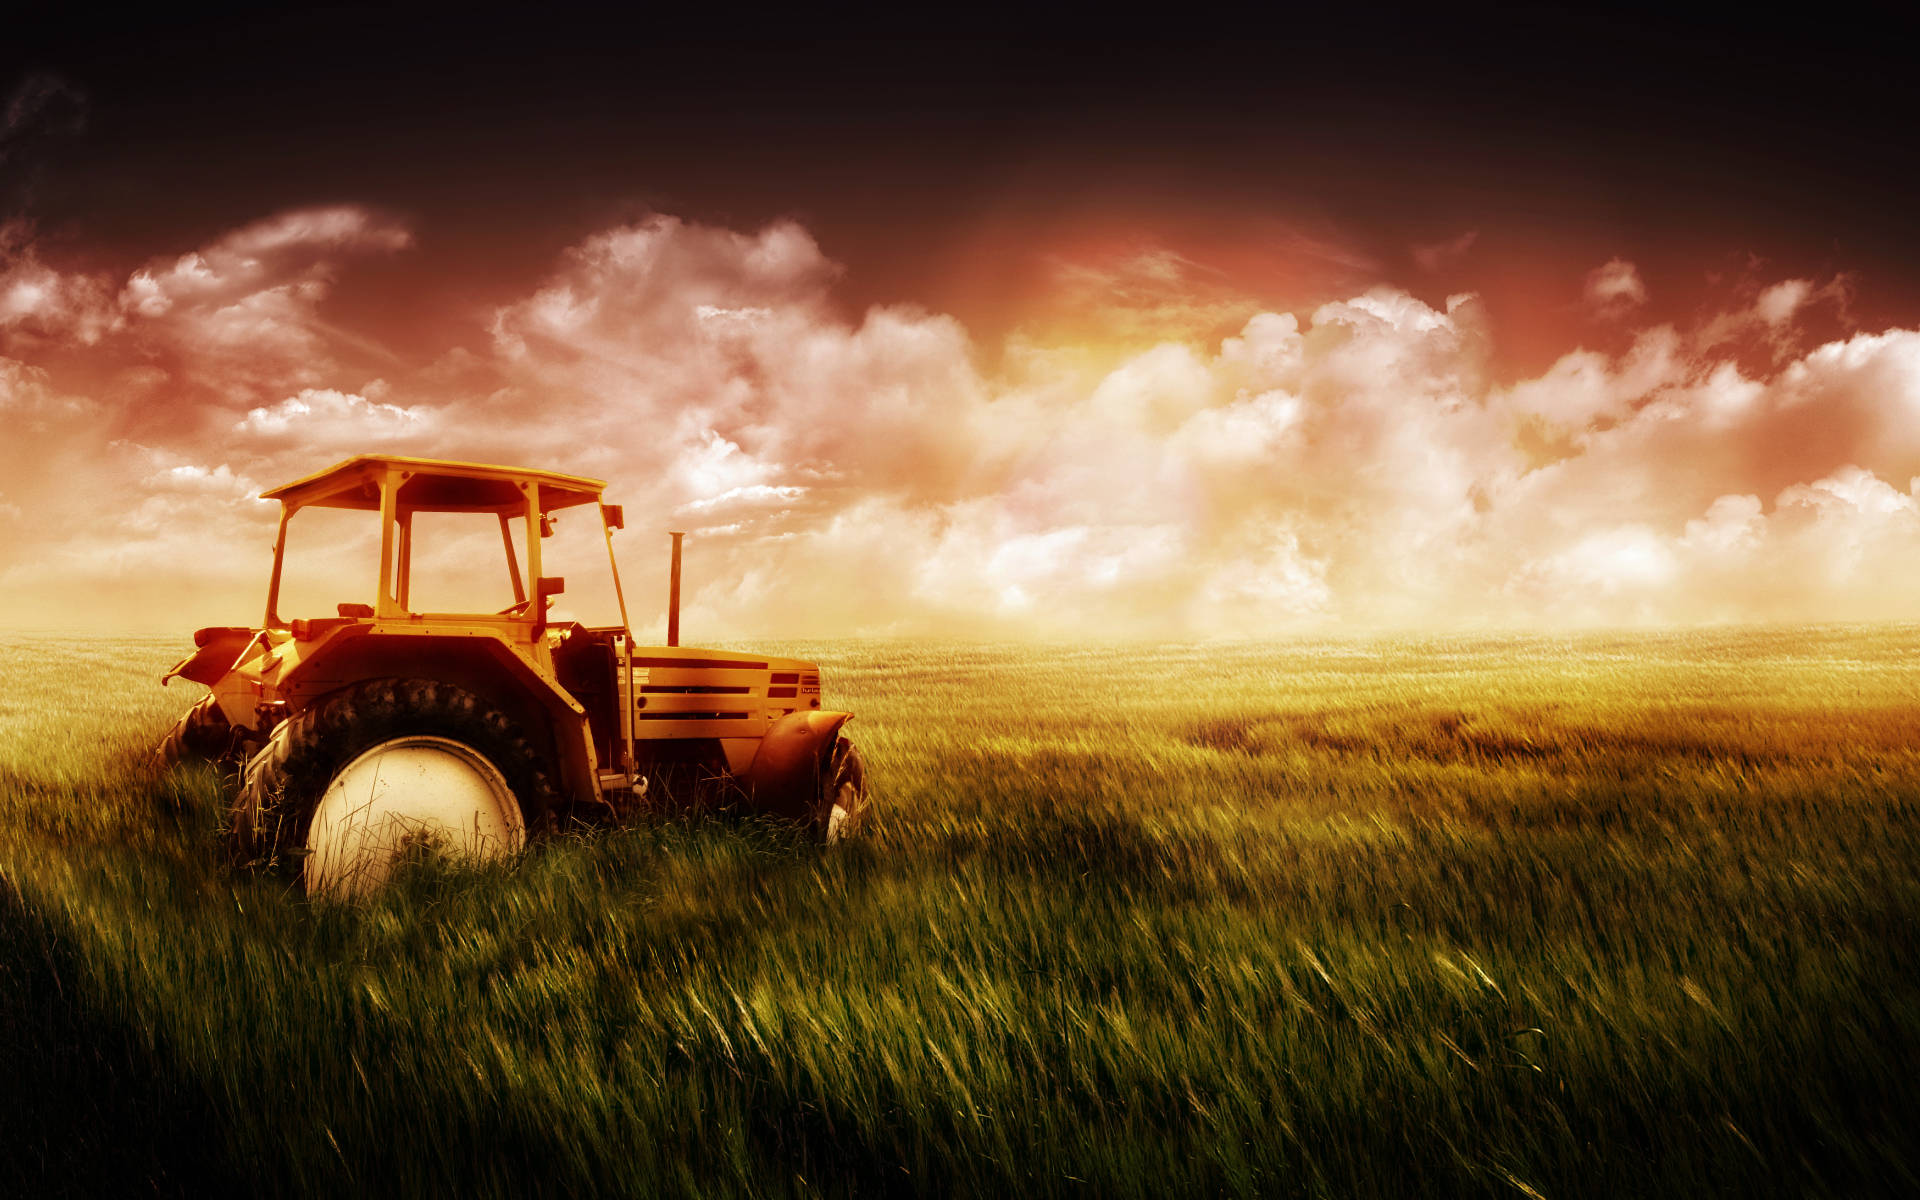 Cinematic Tractor On The Field Wallpaper